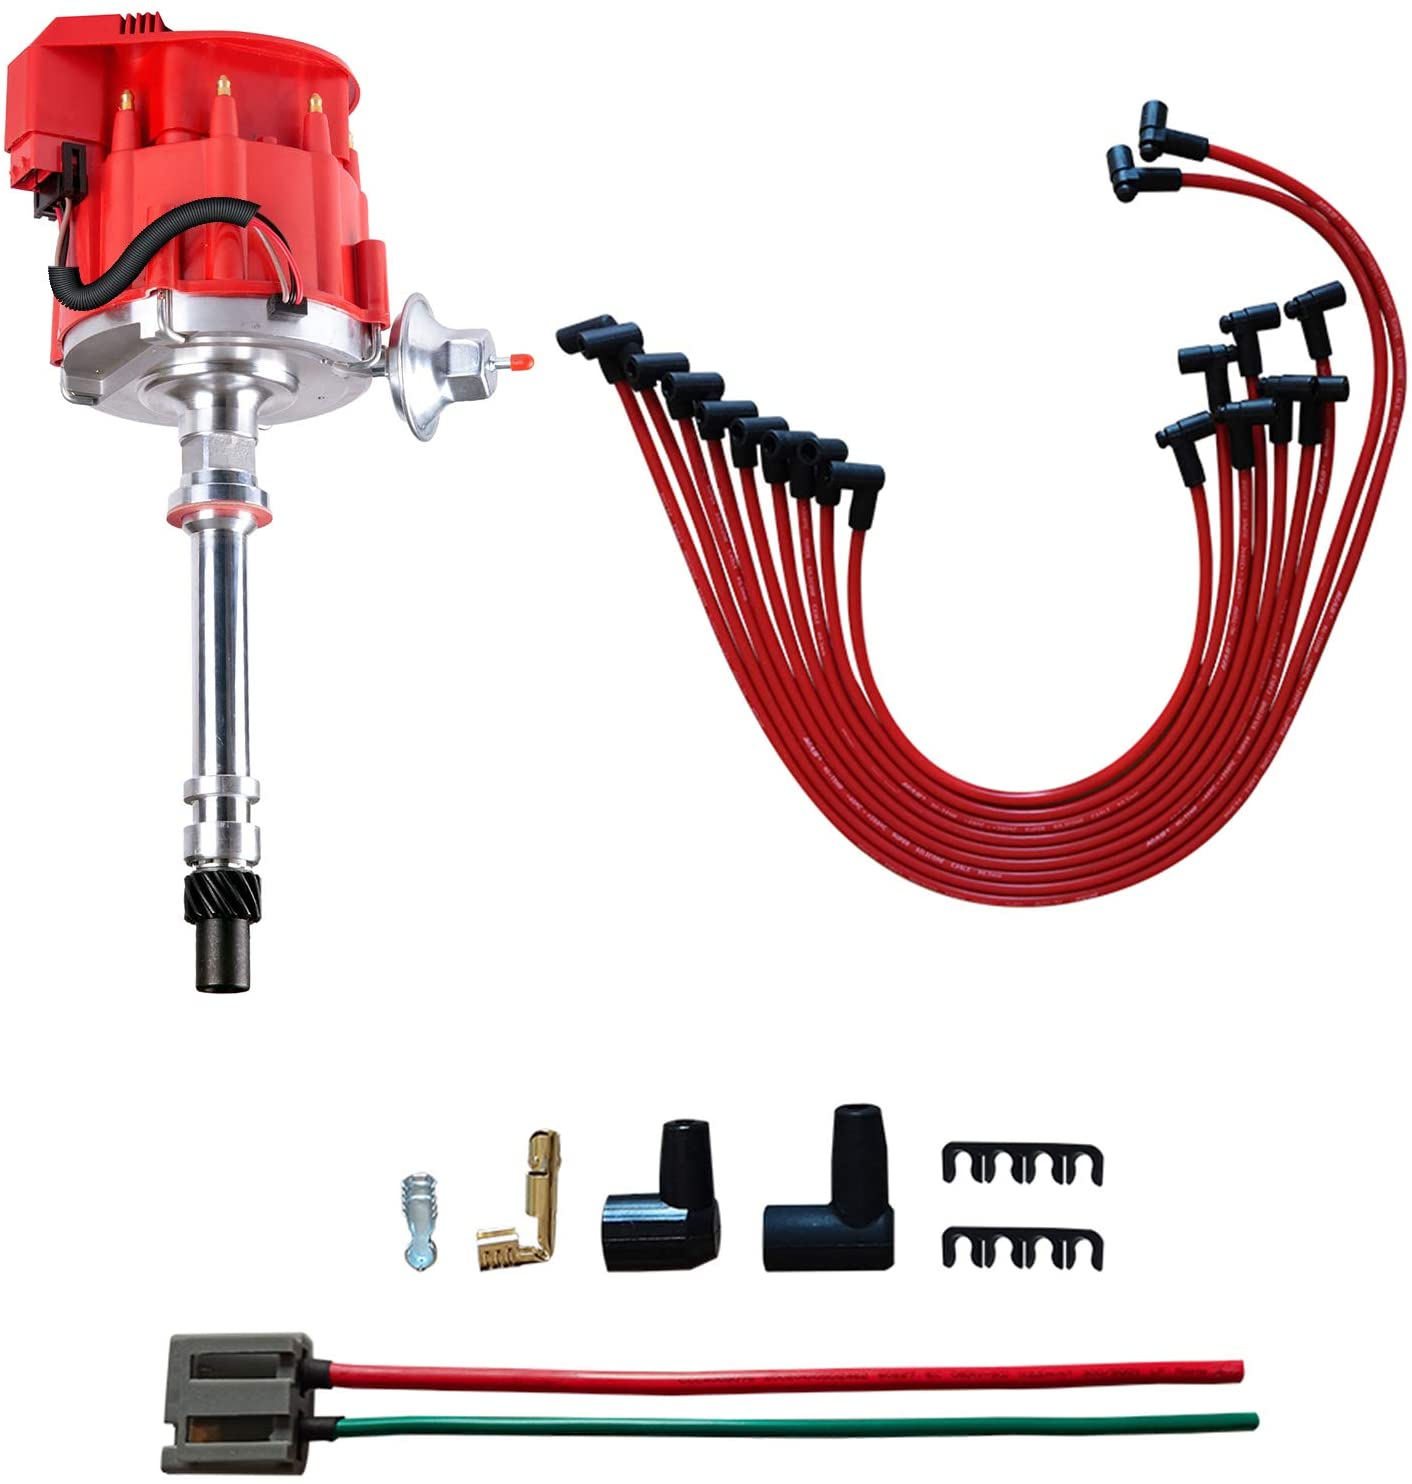 MAS Performance Hei Distributor & Spark Plug Wires & FREE Pigtail Wire Harness Combo Kit Compatible with Chevy/gm SBC BBC Small Block/big Block 65k coil 7500RPM 350 454 302 V8 PC6001A JM6500R PE350R